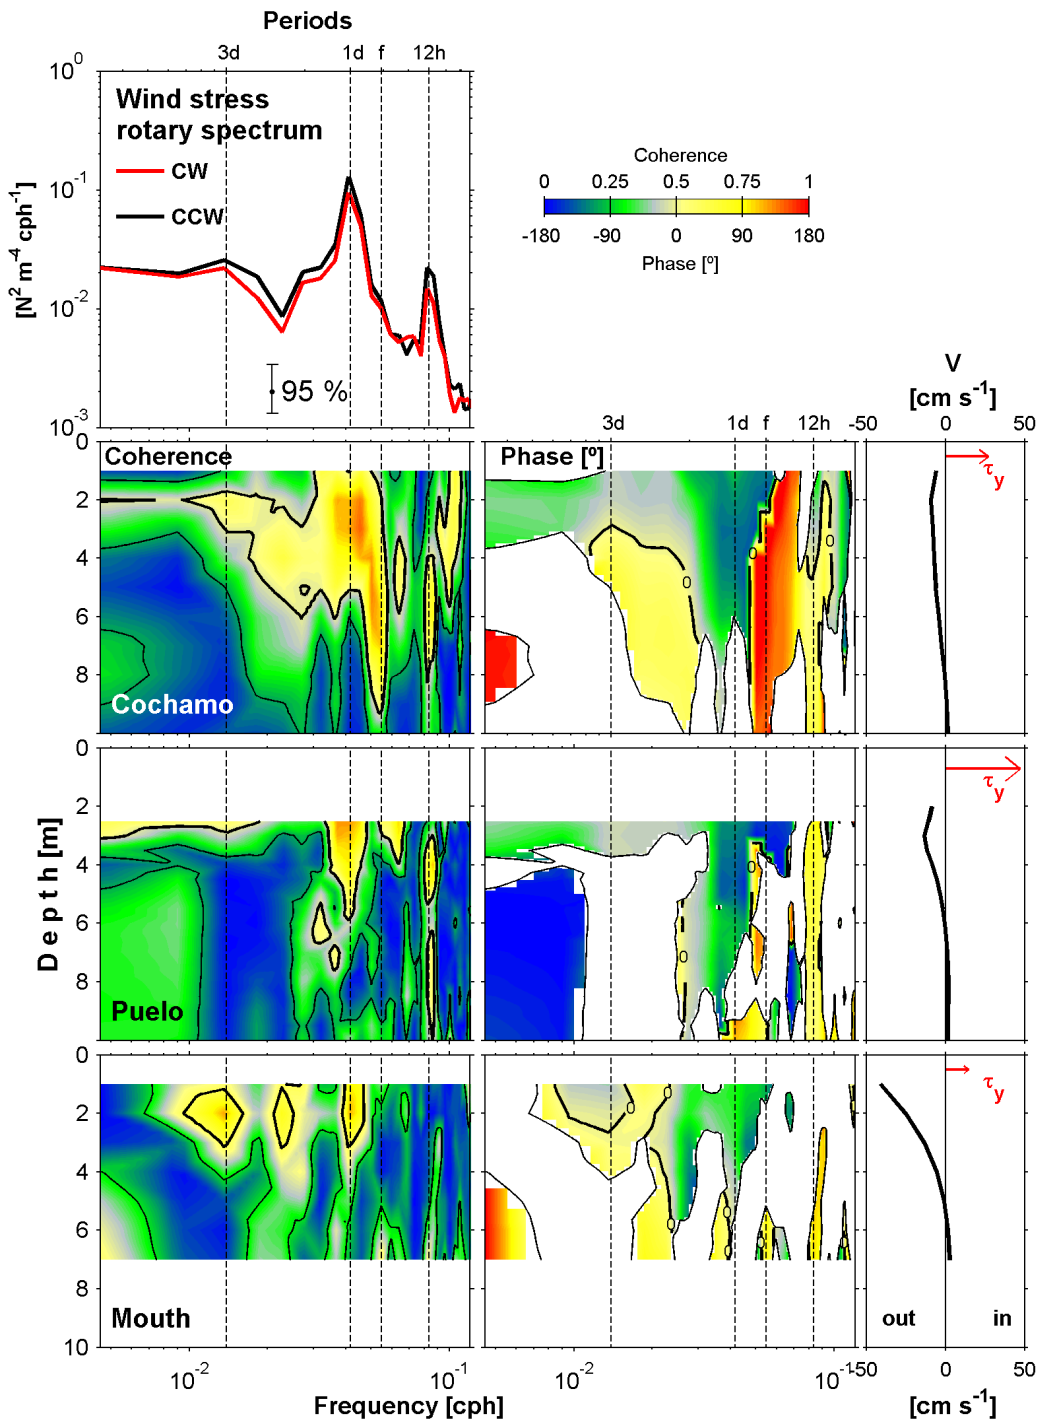 Figure A.1. The upper-left insert presents the rotary spectrum of the wind stress. Here, the red line indicates clockwise rotations (CW) and the black line counter-clockwise (CCW) rotations.